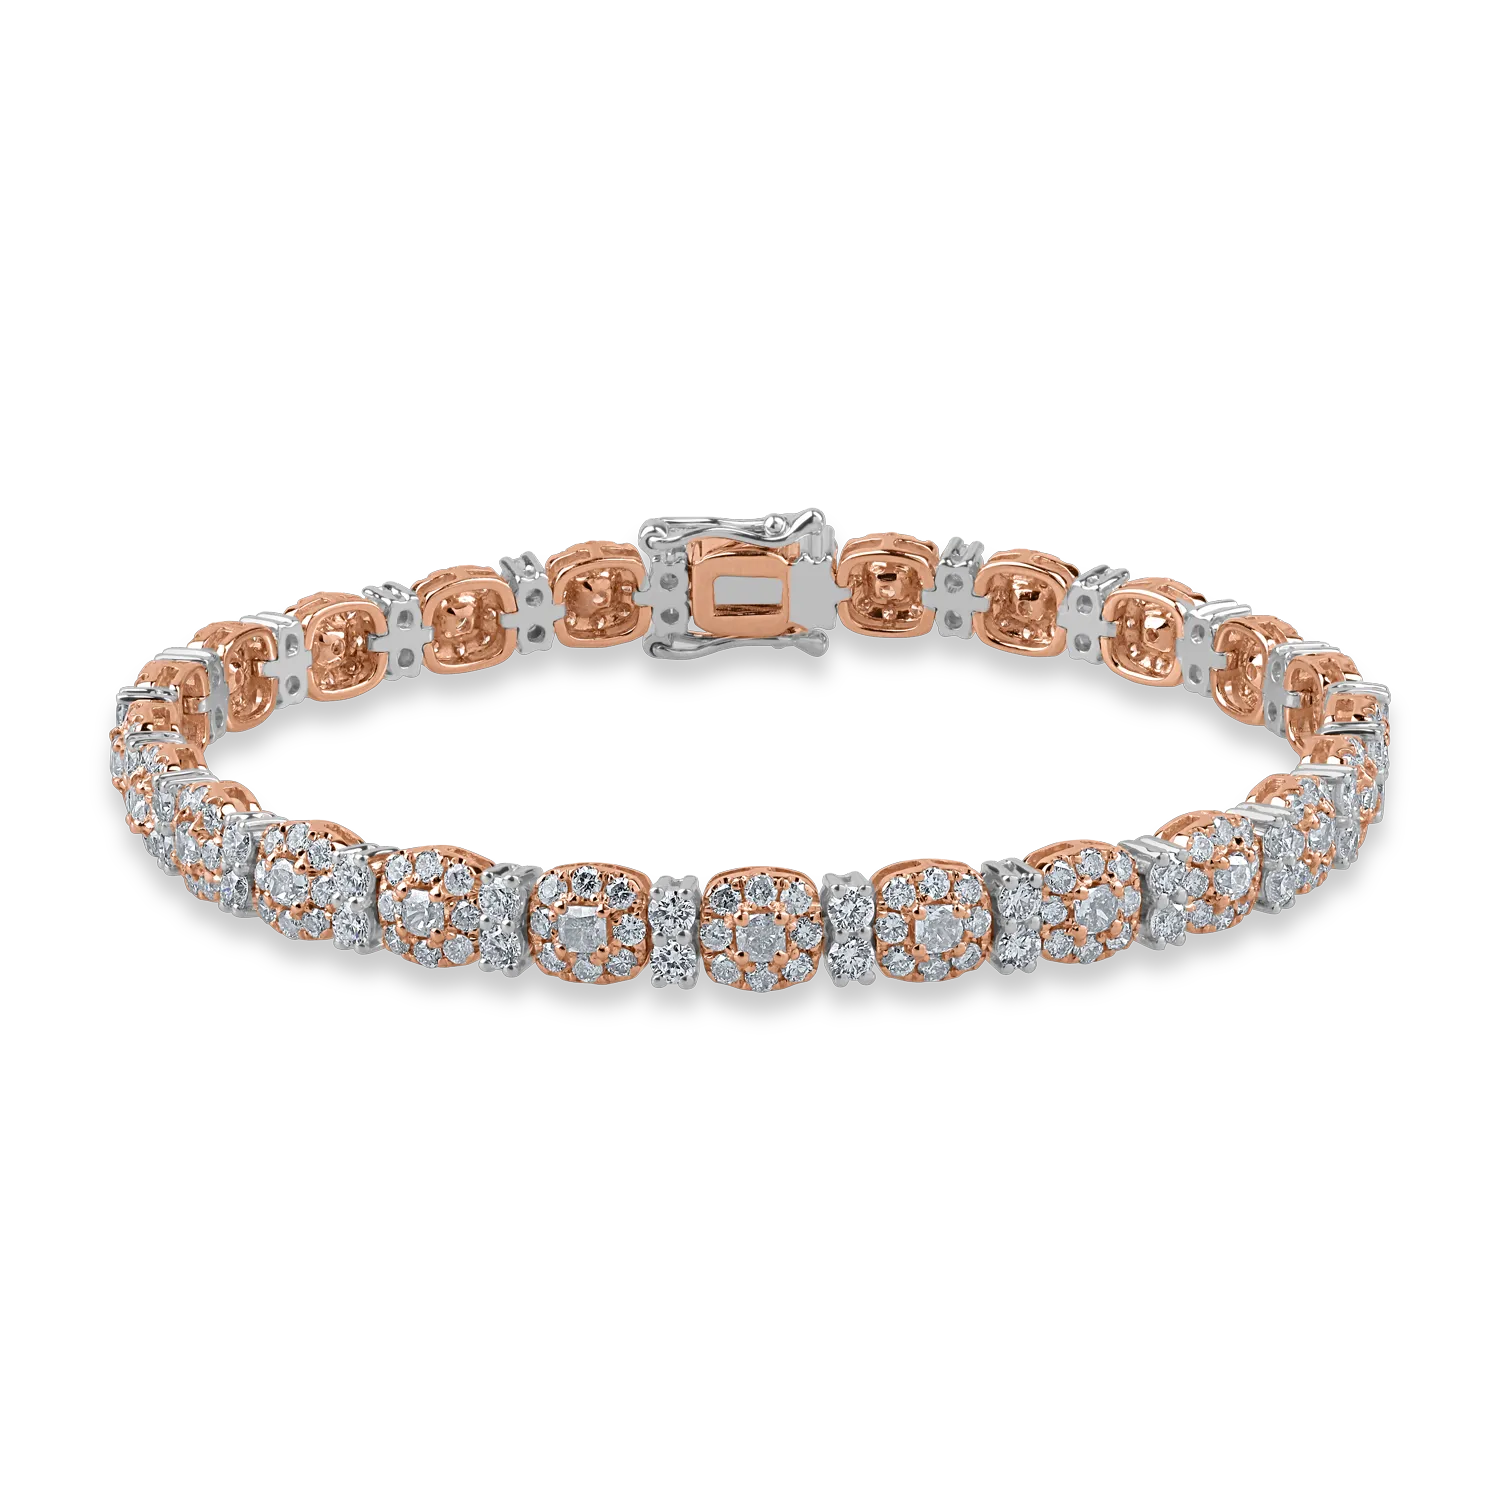 White-rose gold tennis bracelet with 3.57ct pink diamonds and 1.66ct clear diamonds